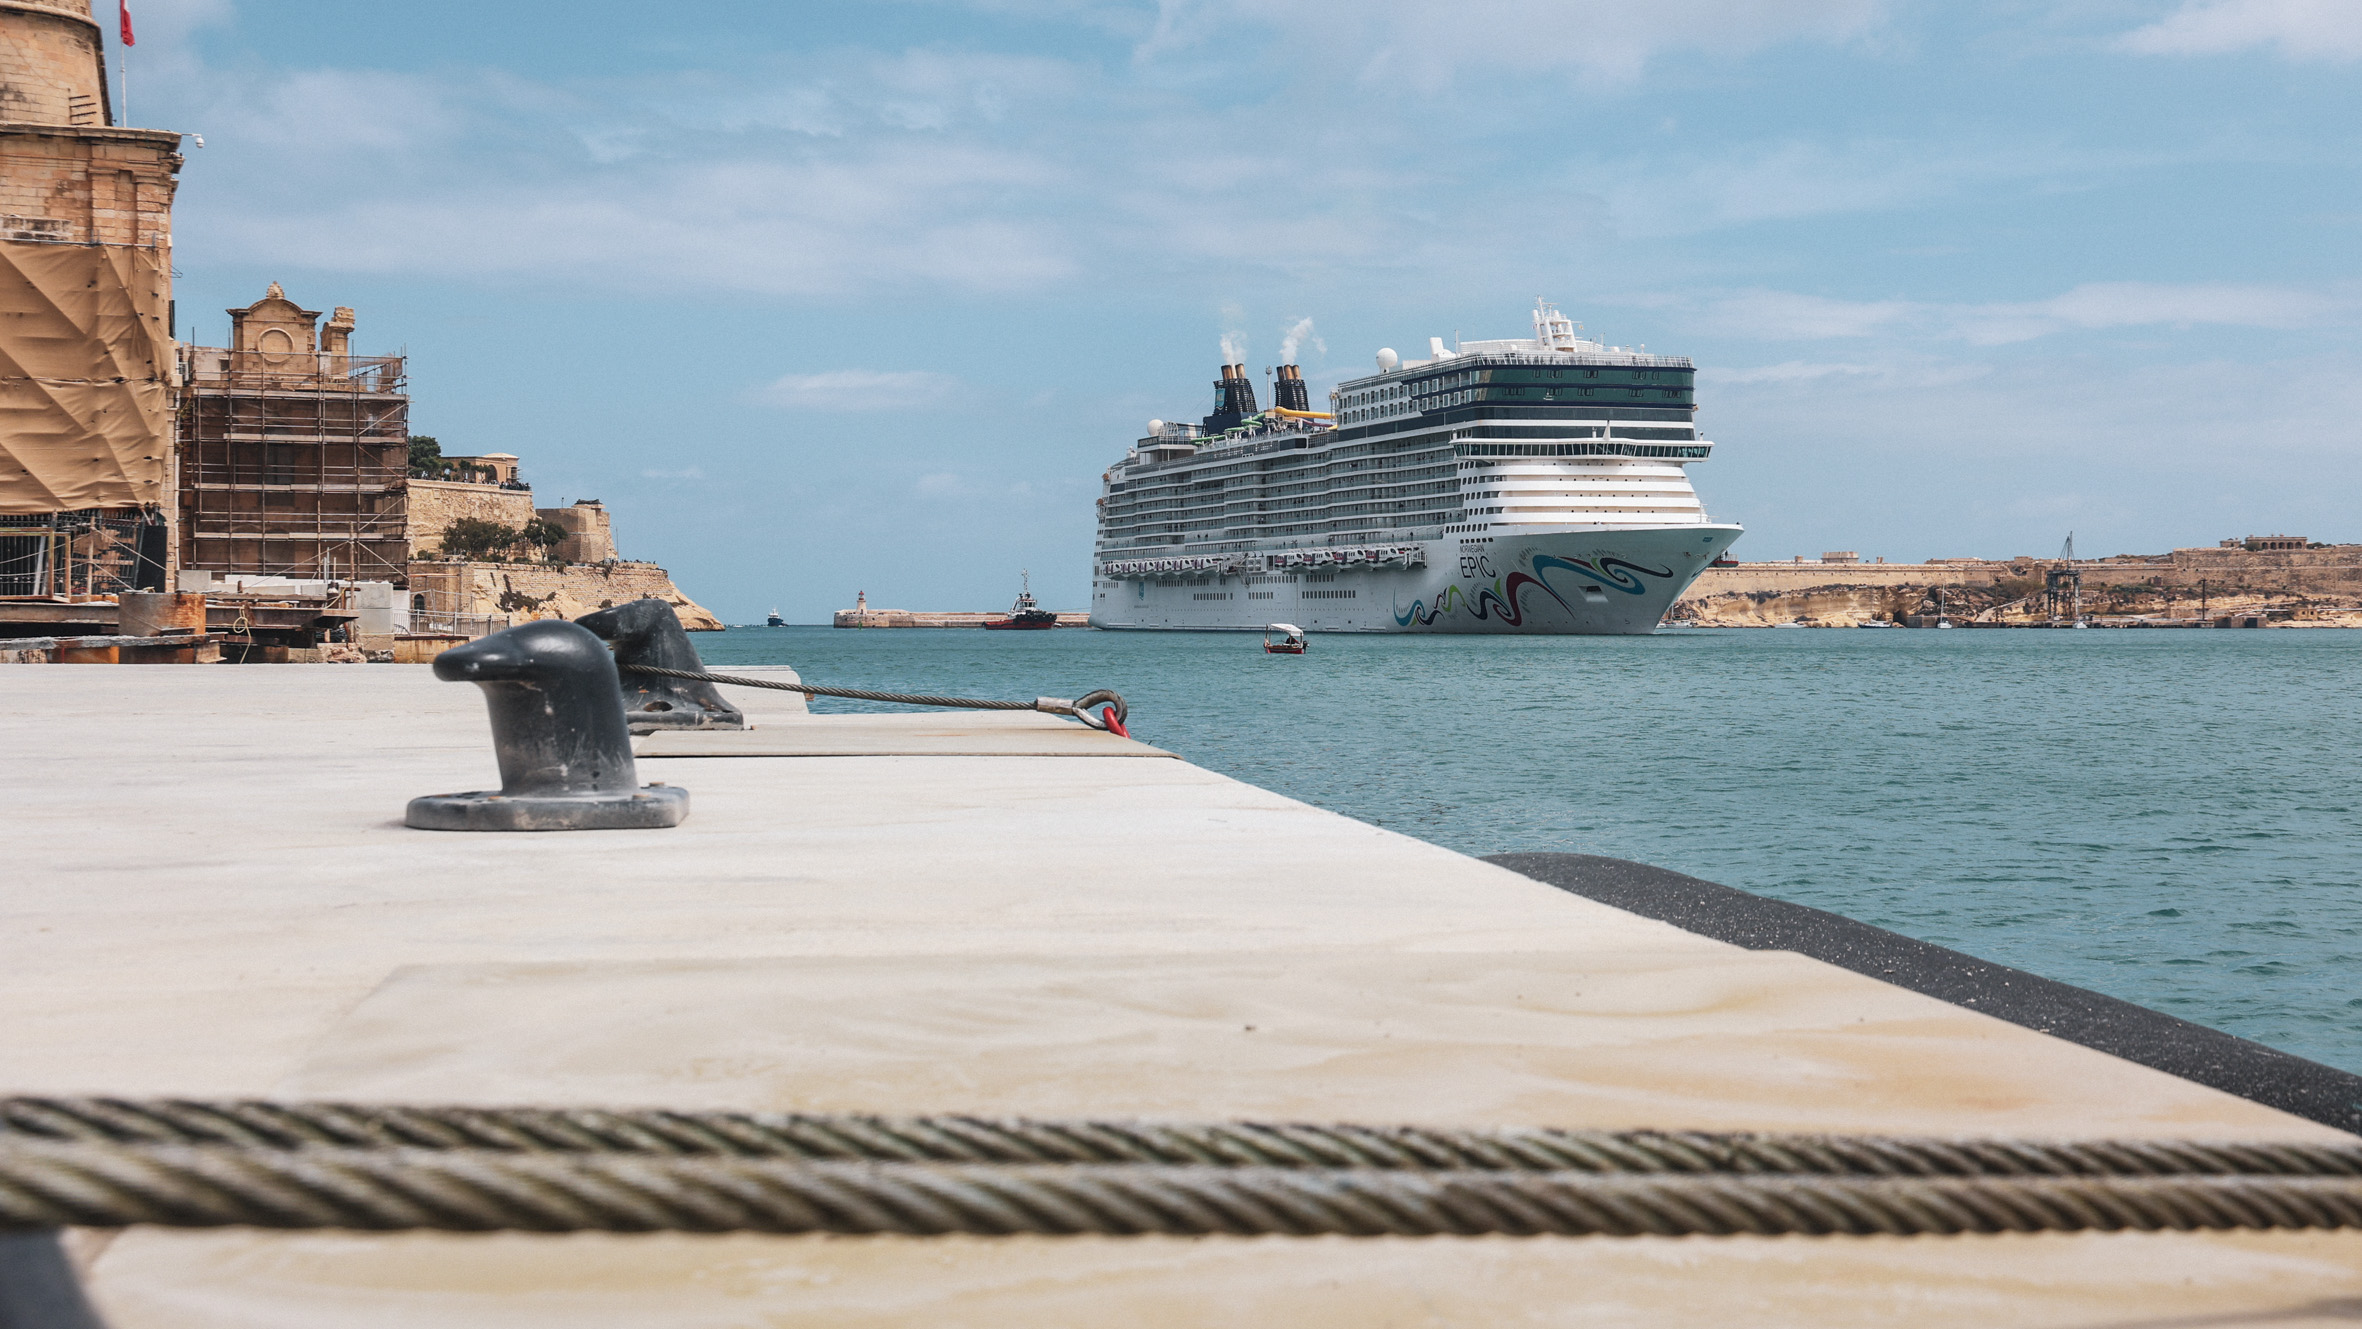 Infrastructure Malta welcomes the berthing of the first cruise liner at Pinto Quays